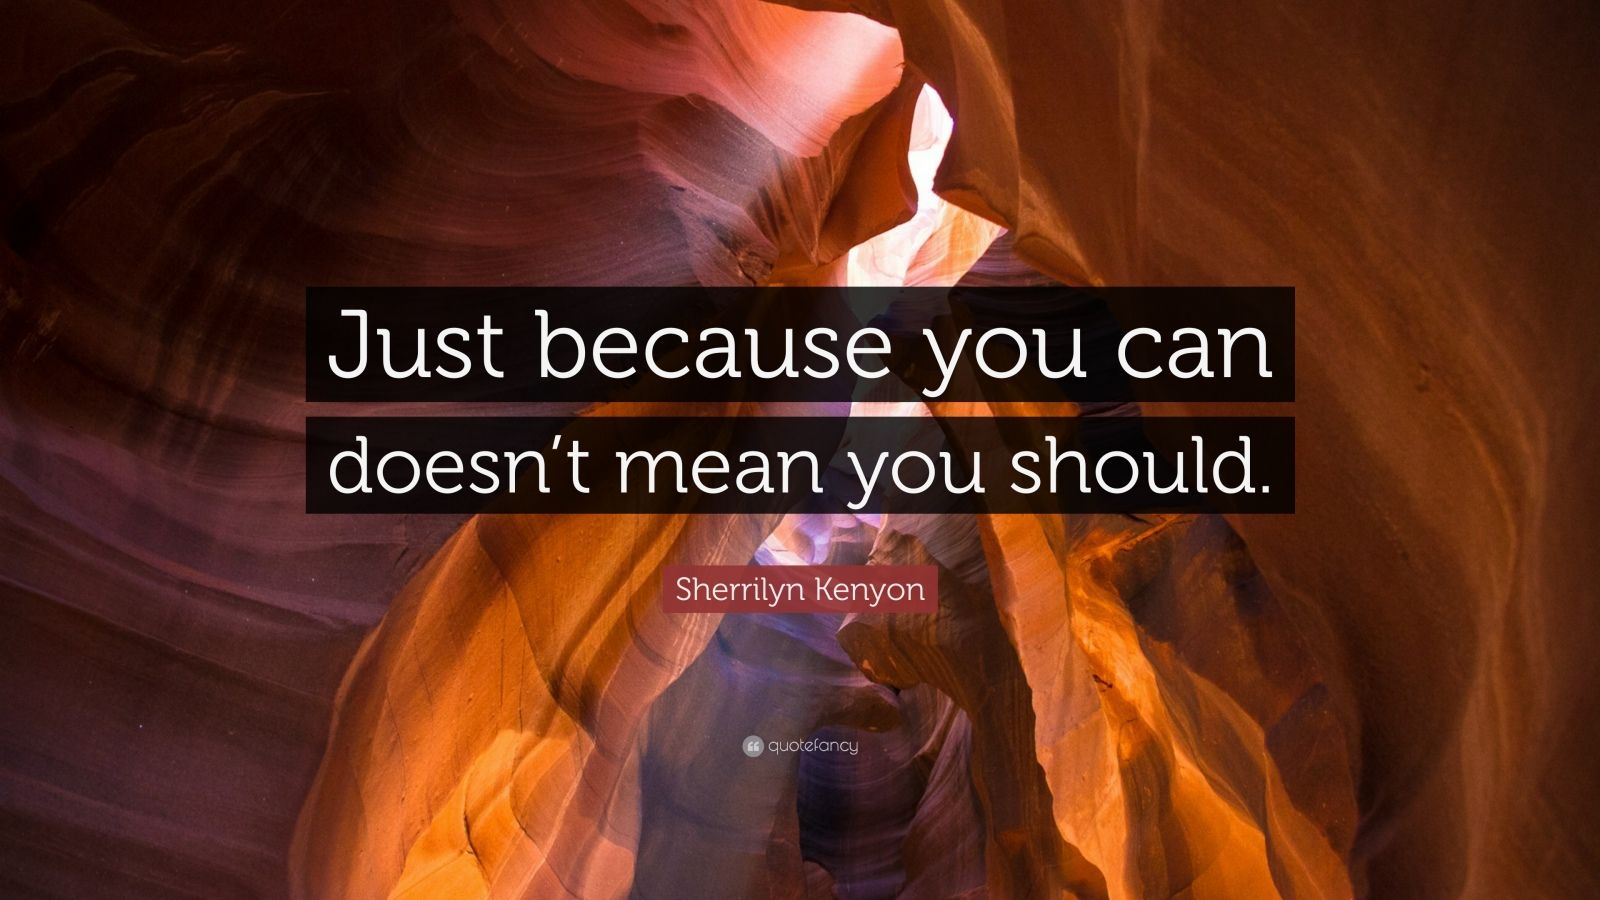 Sherrilyn Kenyon Quote “just Because You Can Doesnt Mean You Should” 7 Wallpapers Quotefancy